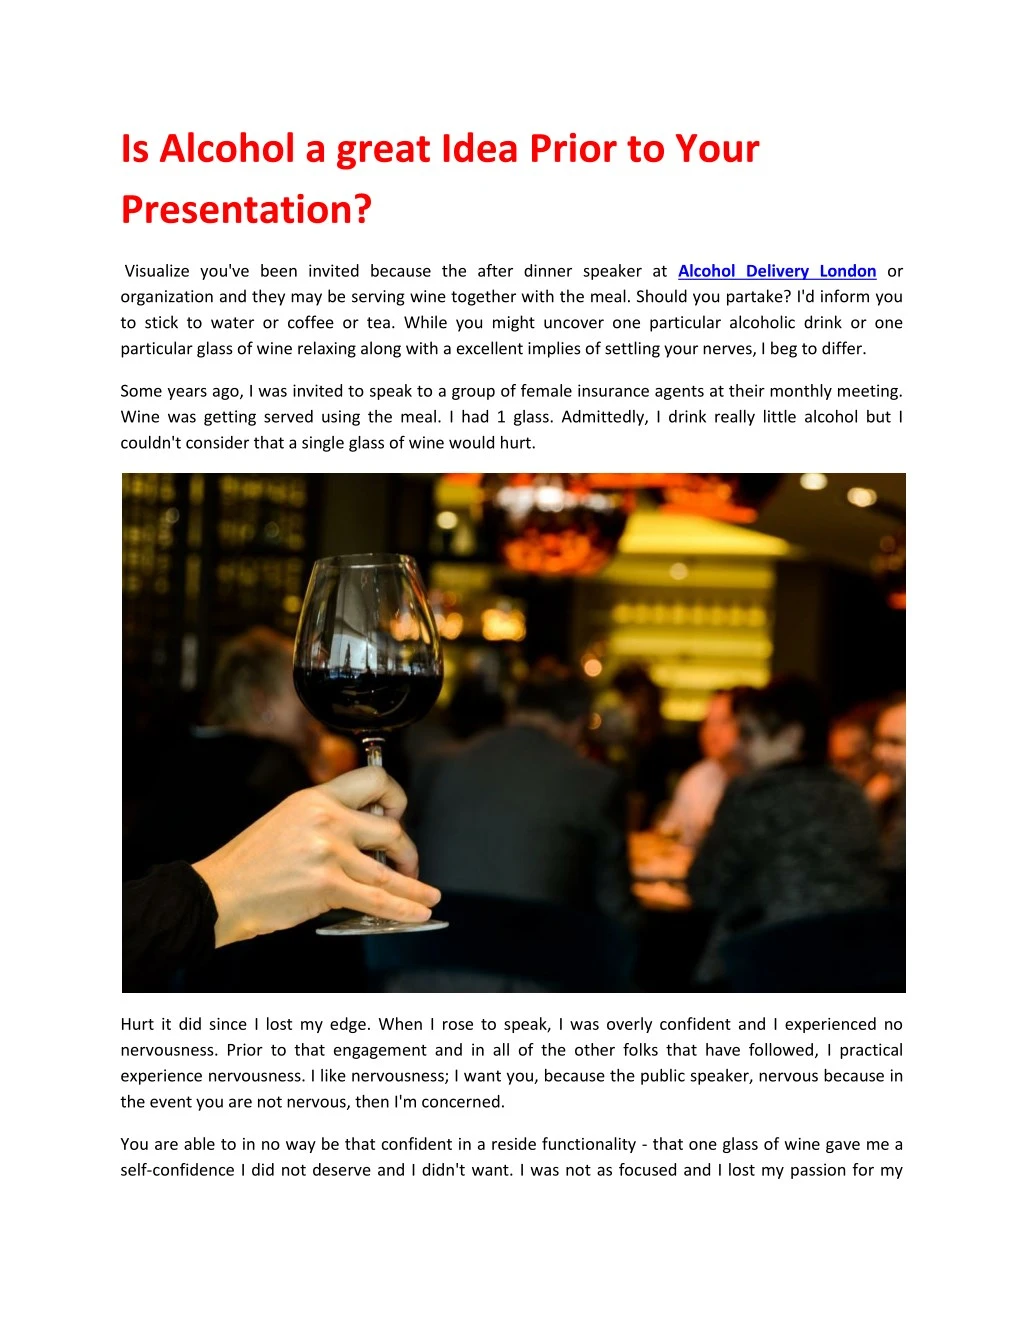 is alcohol a great idea prior to your presentation